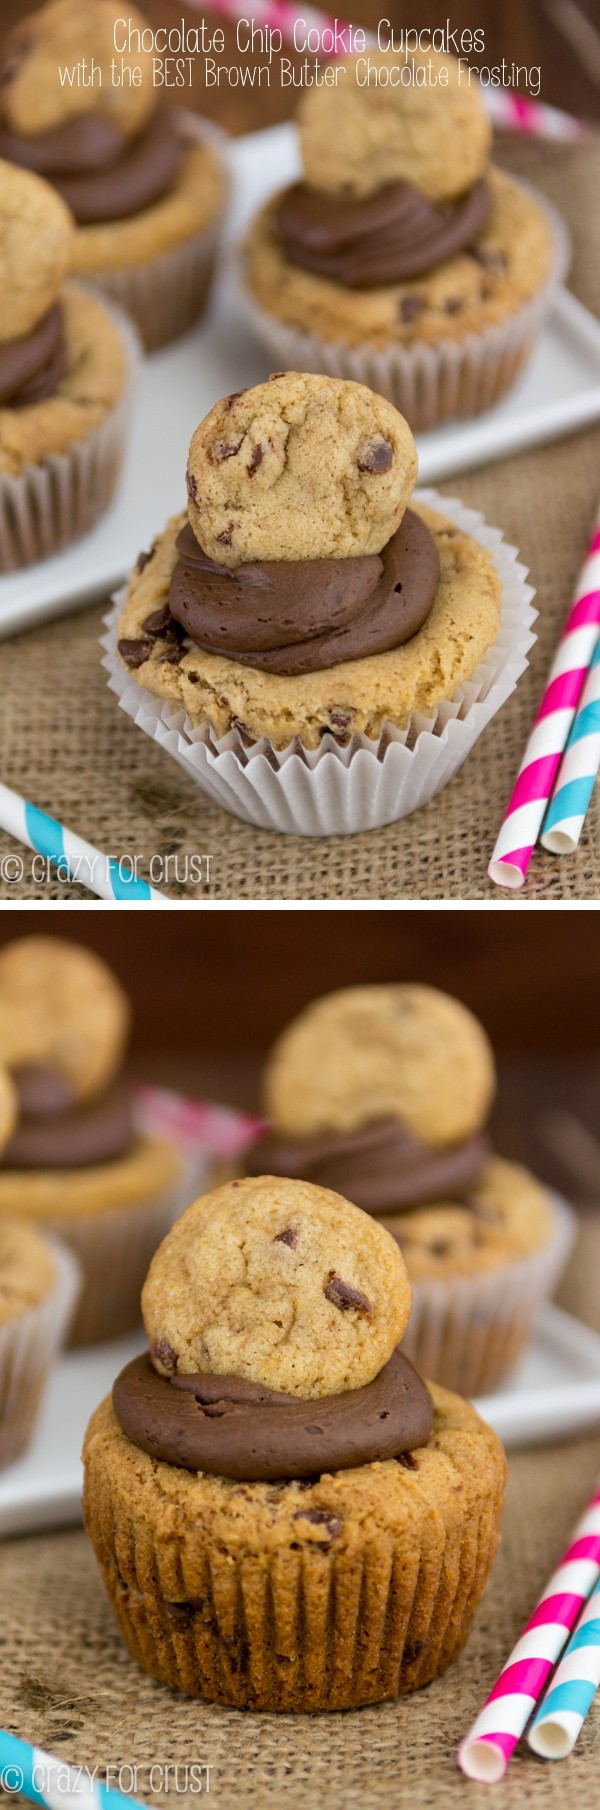 Chocolate Chip Cookie Cupcakes and the BEST chocolate frosting ever! Plus a tutorial on how to brown butter!